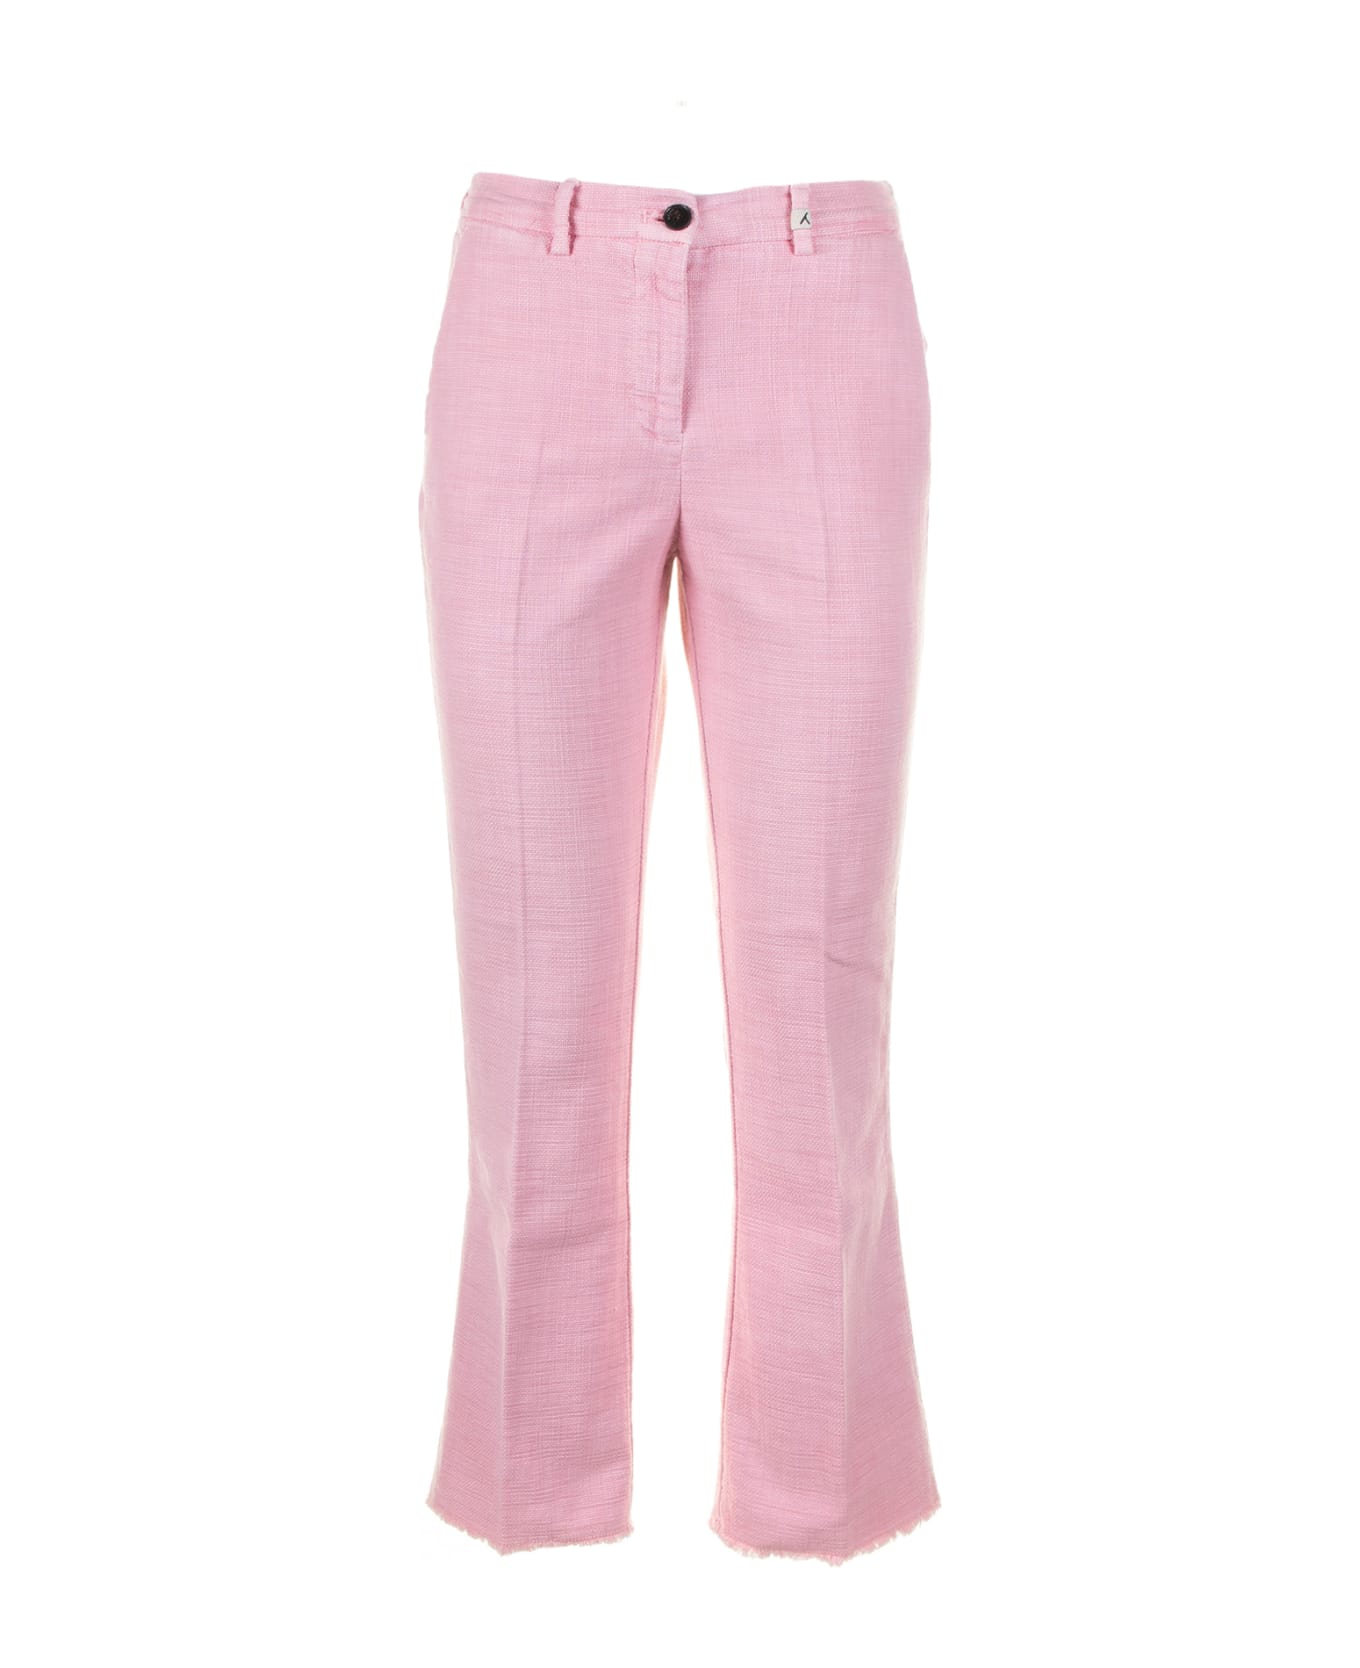 Myths Women's Pink Trousers - ROSA ボトムス